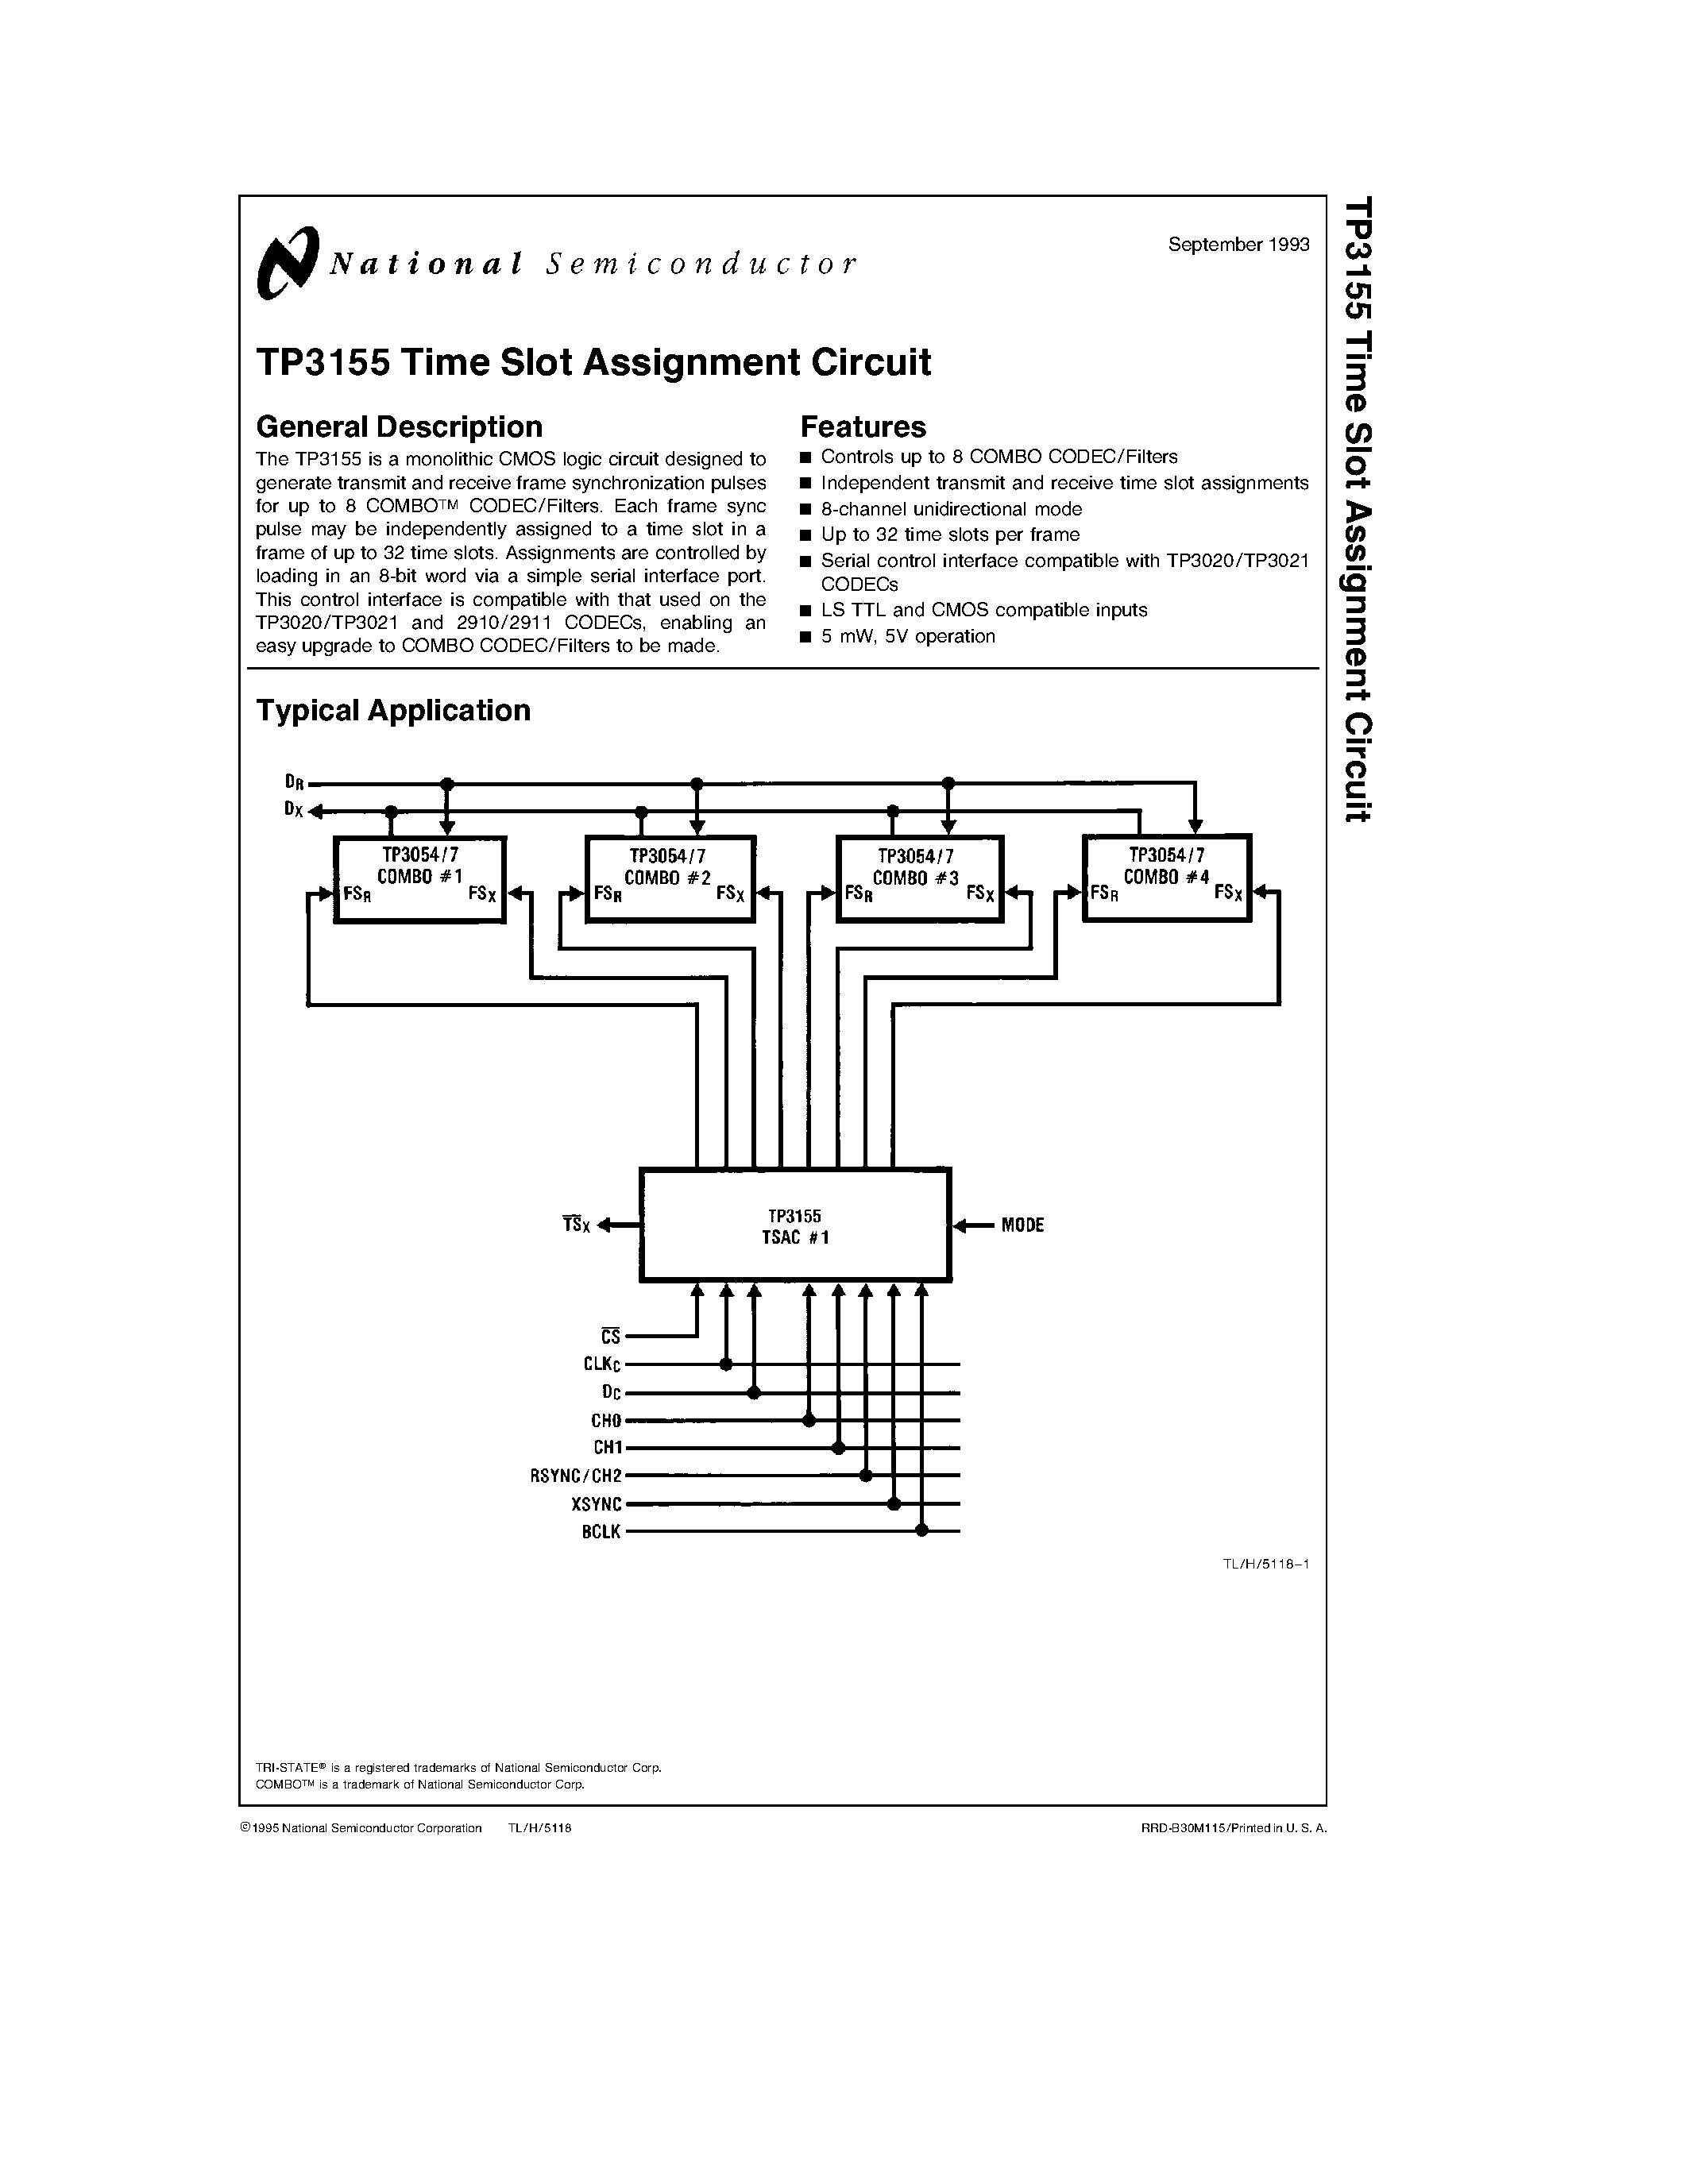 Datasheet TP3155 - TP3155 Time Slot Assignment Circuit page 1